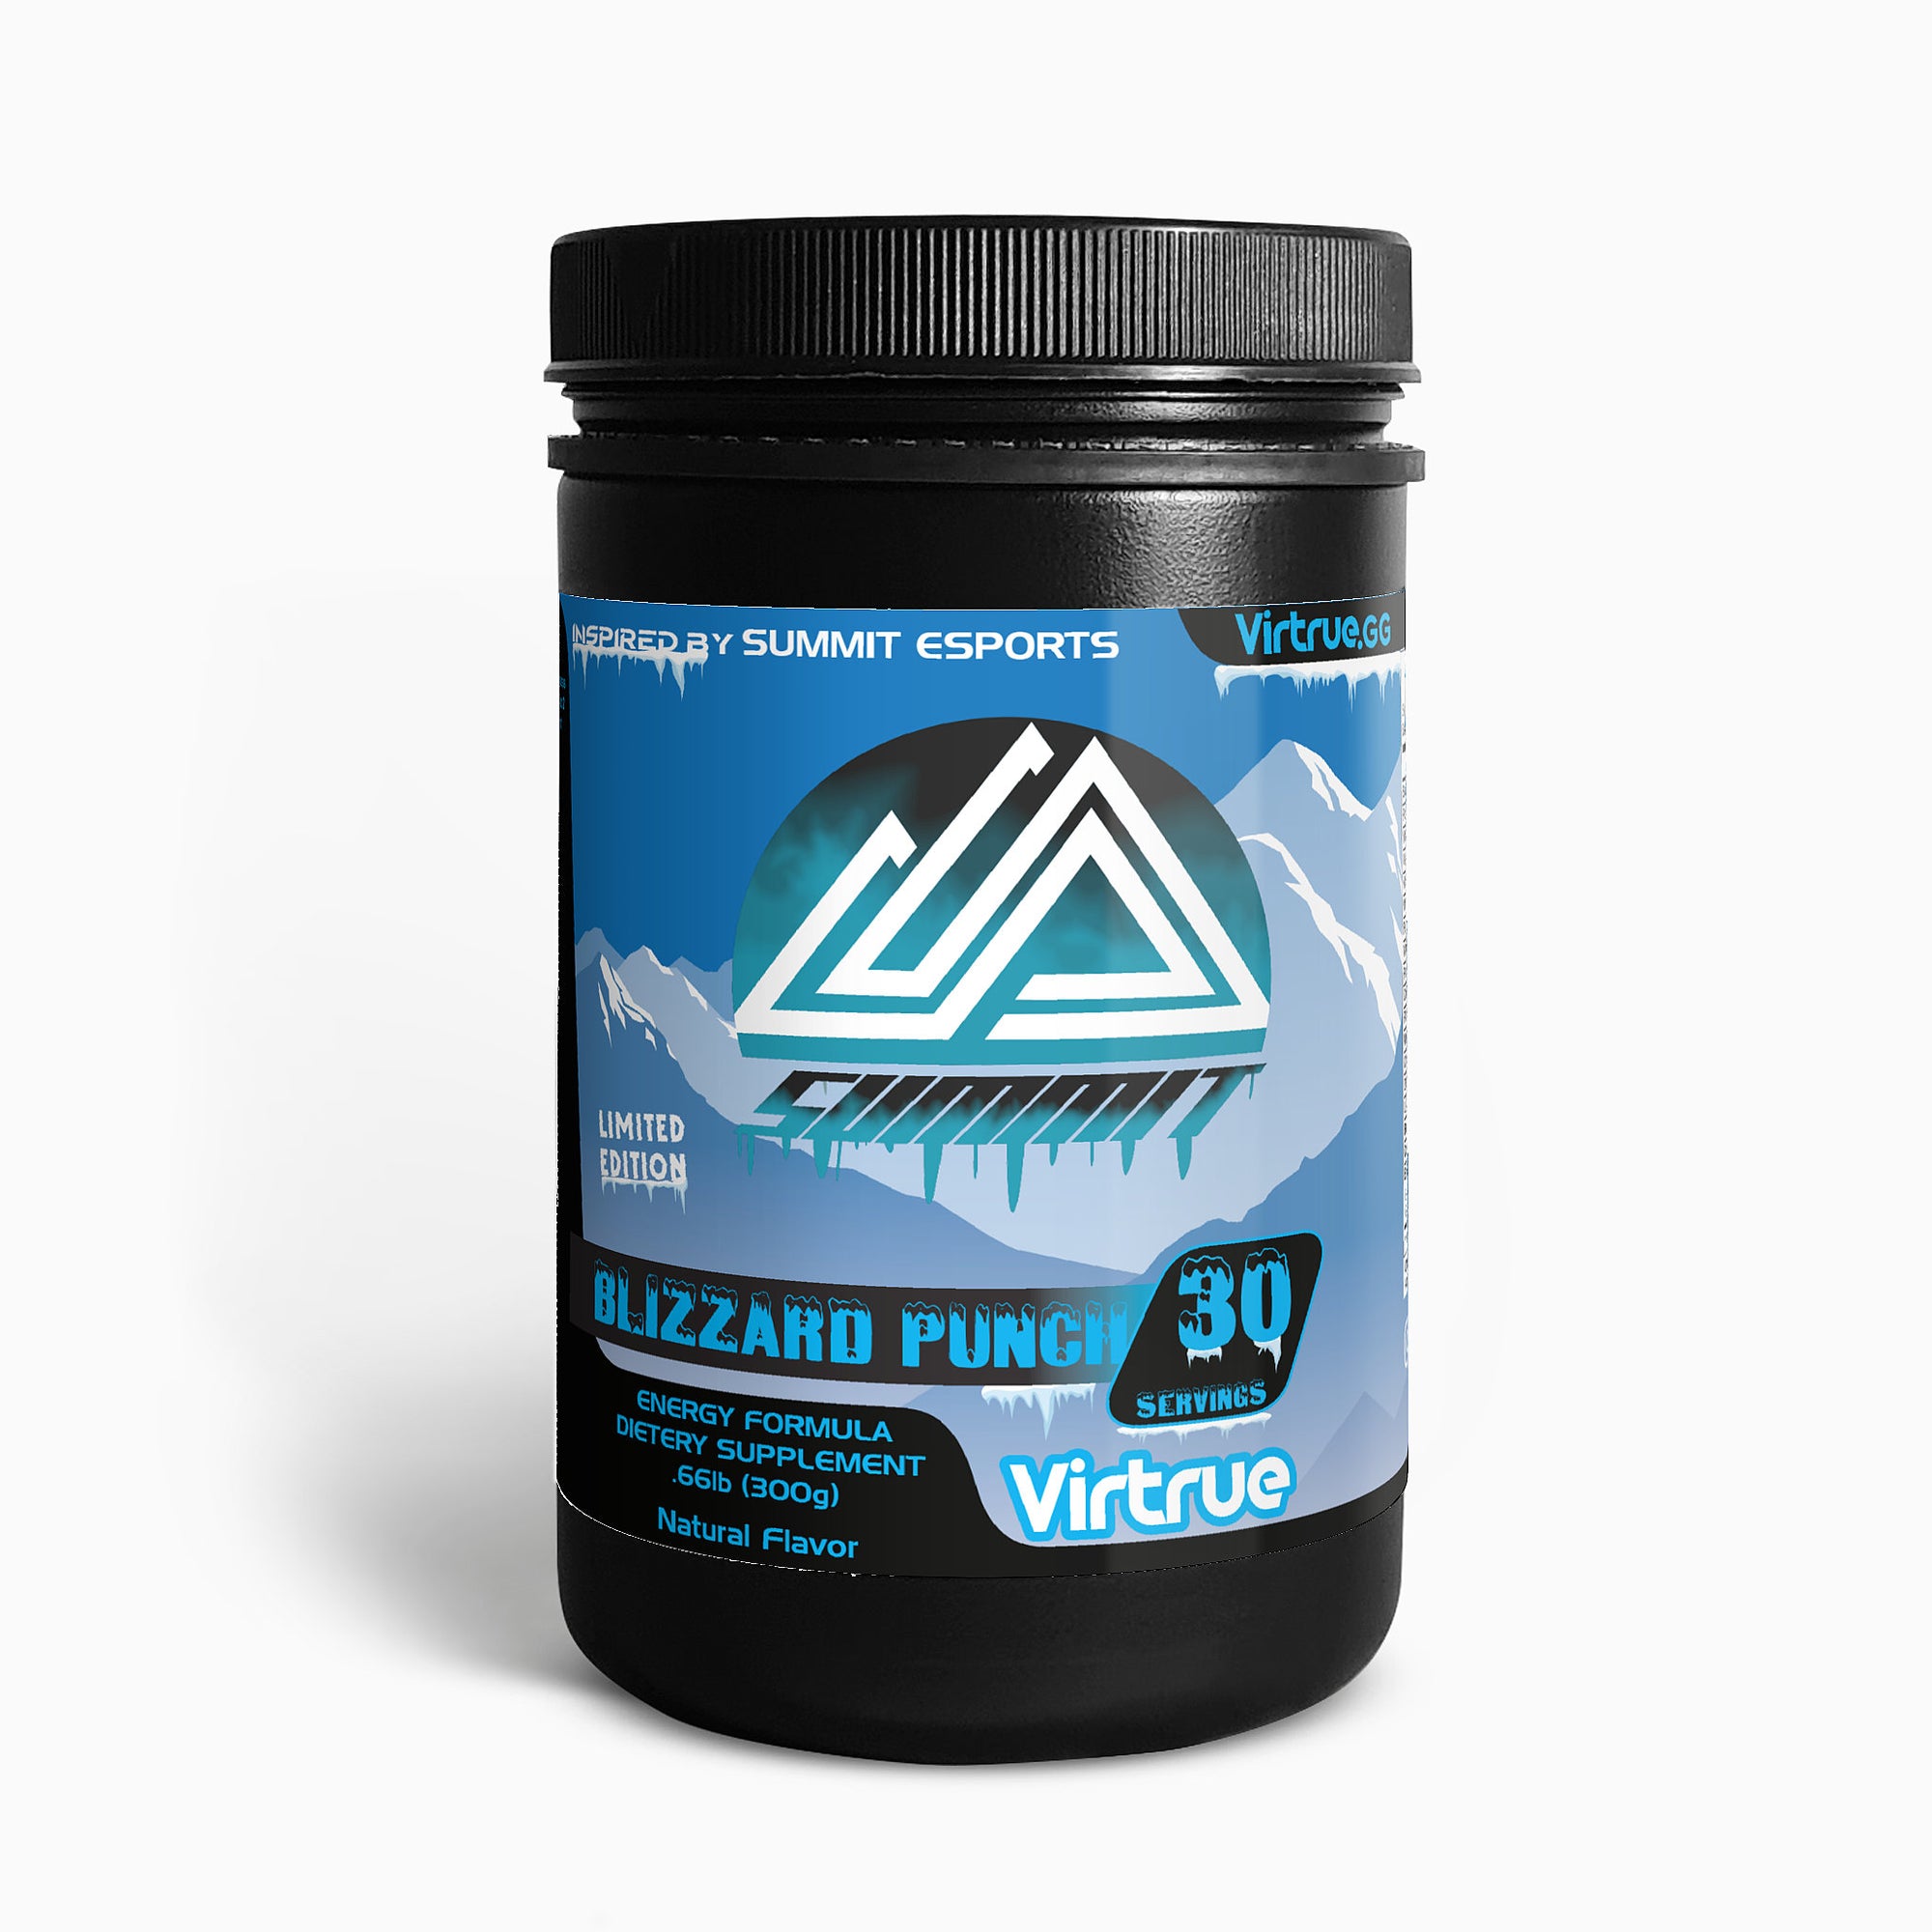 Blizzard Punch Energy Formula - Inspired by Summit Esports